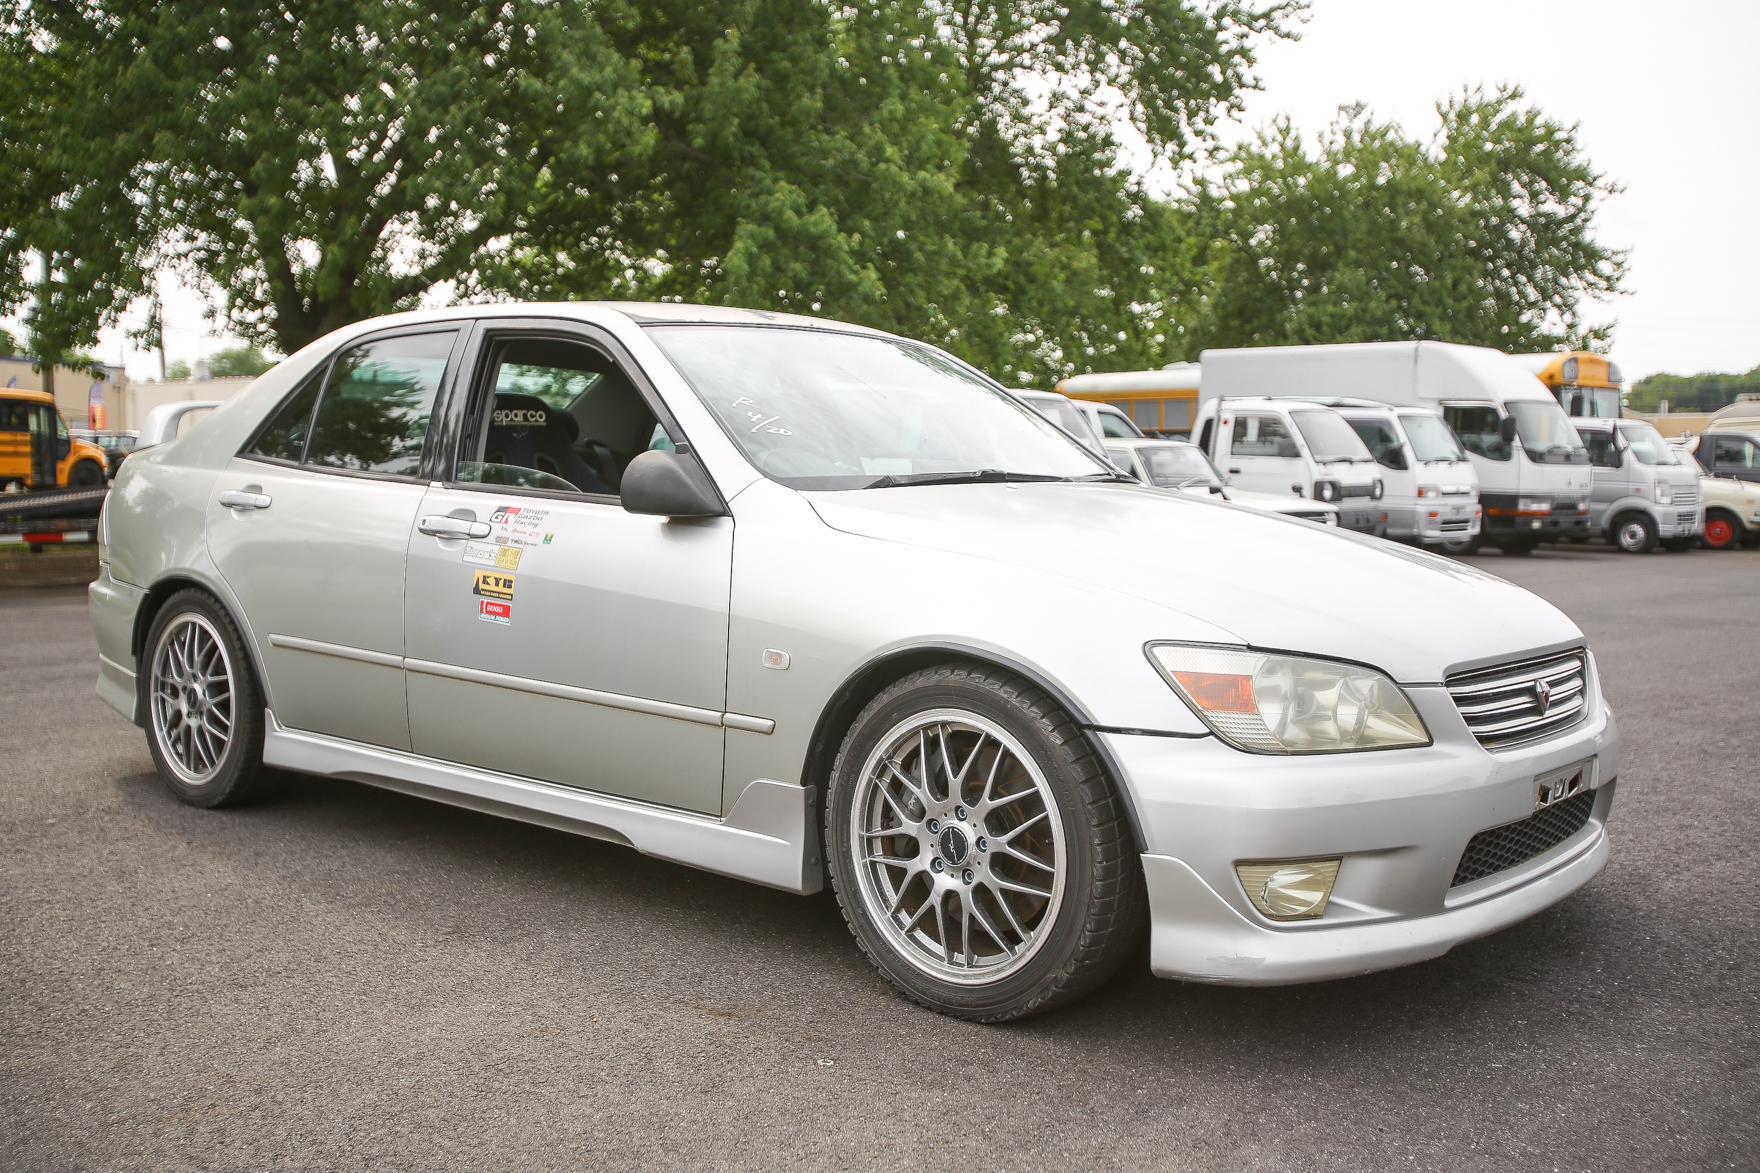 1998 Toyota Altezza RS200 Z-Edition - Available for $8,750